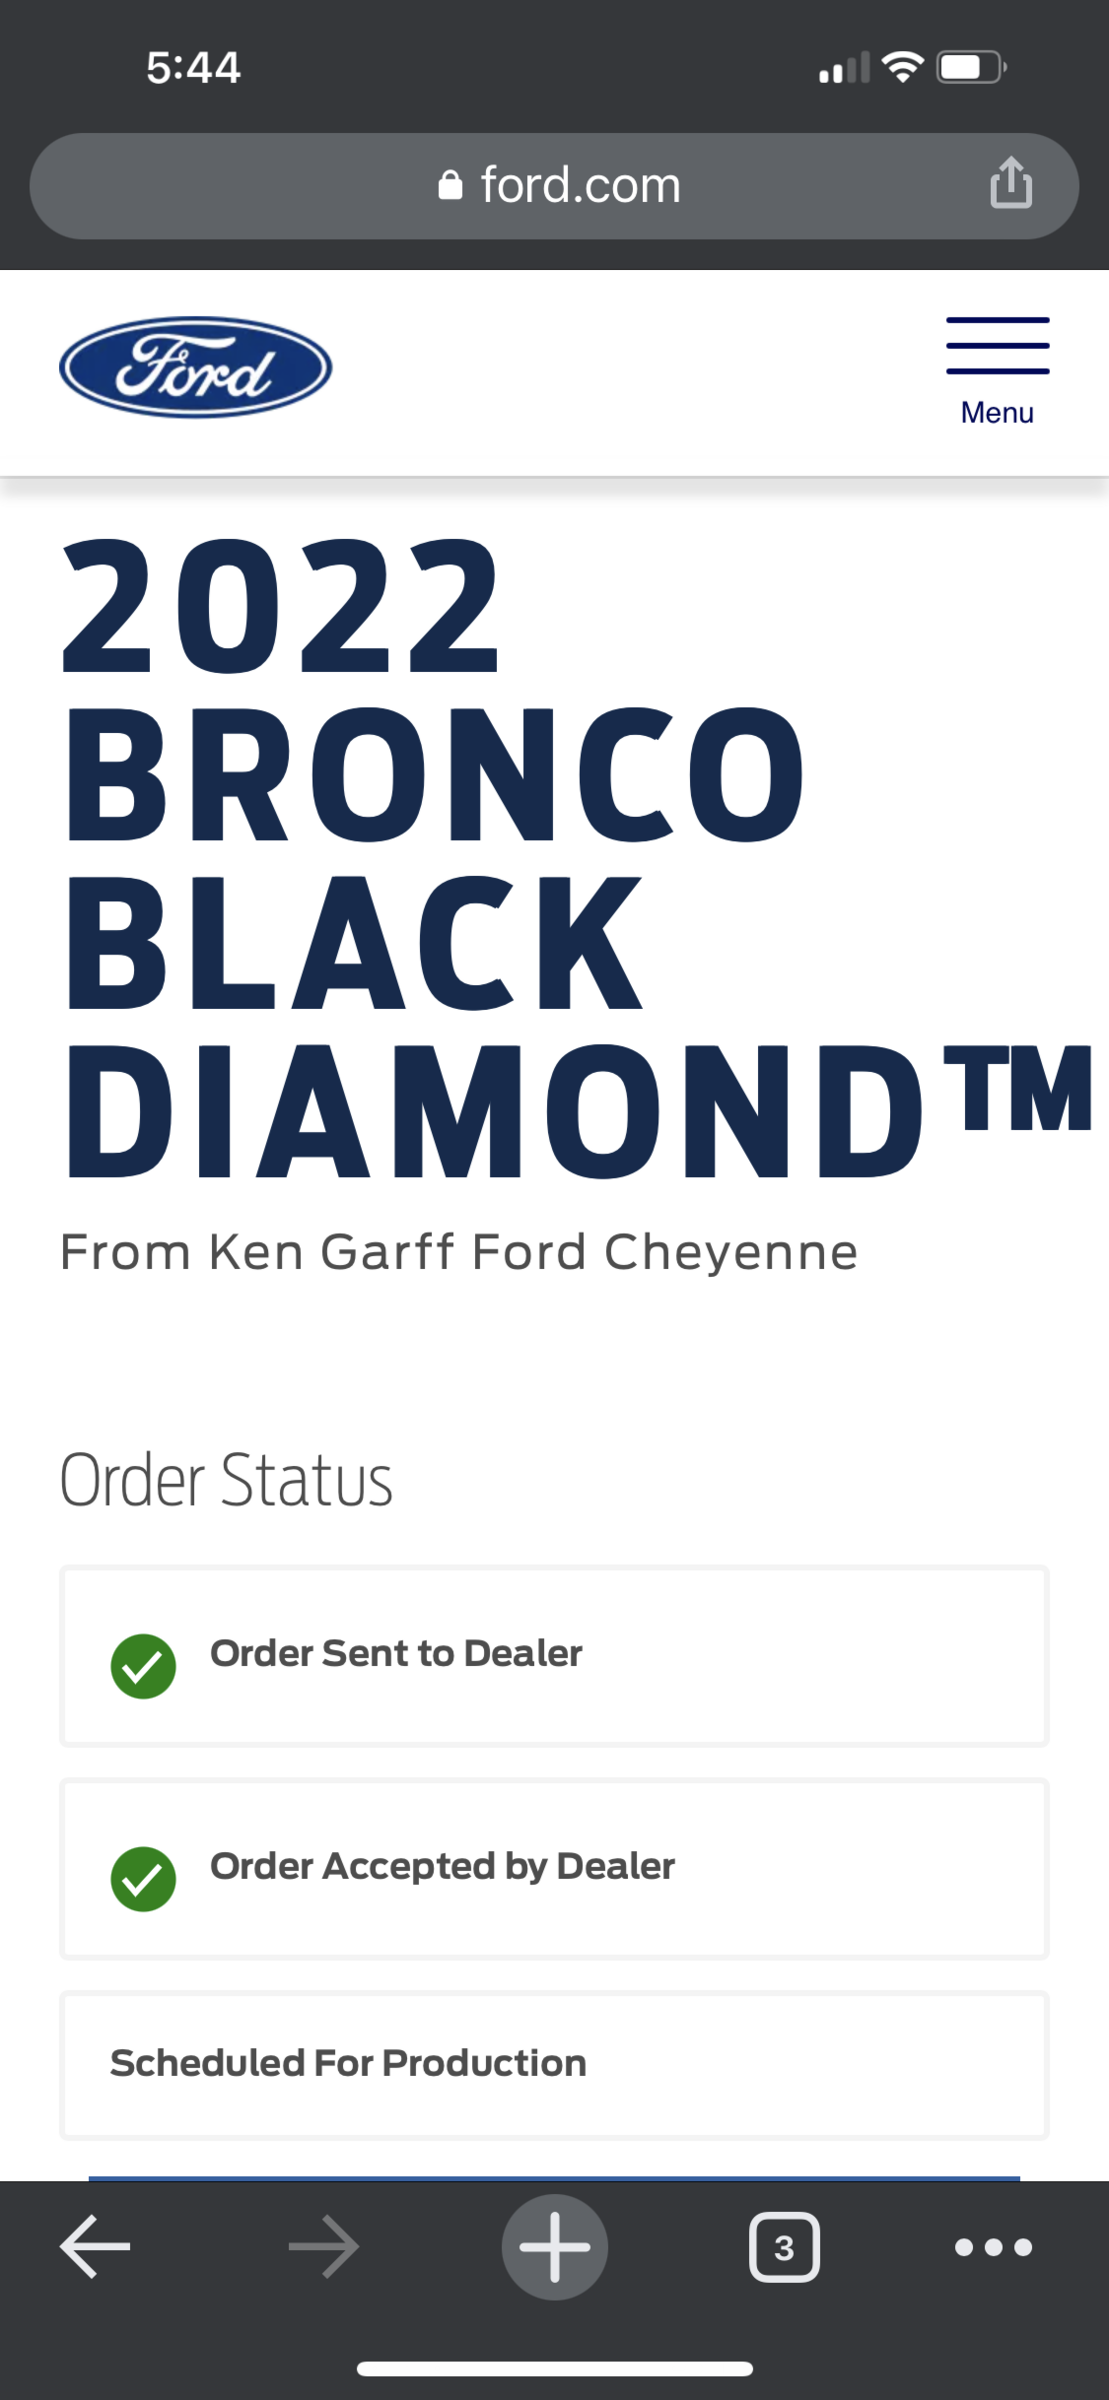 Ford Bronco Check your Bronco order status using back door link. Found out I'm In-Production without email received 1CA63A12-144F-4E46-BC64-D3FB7B8C2104